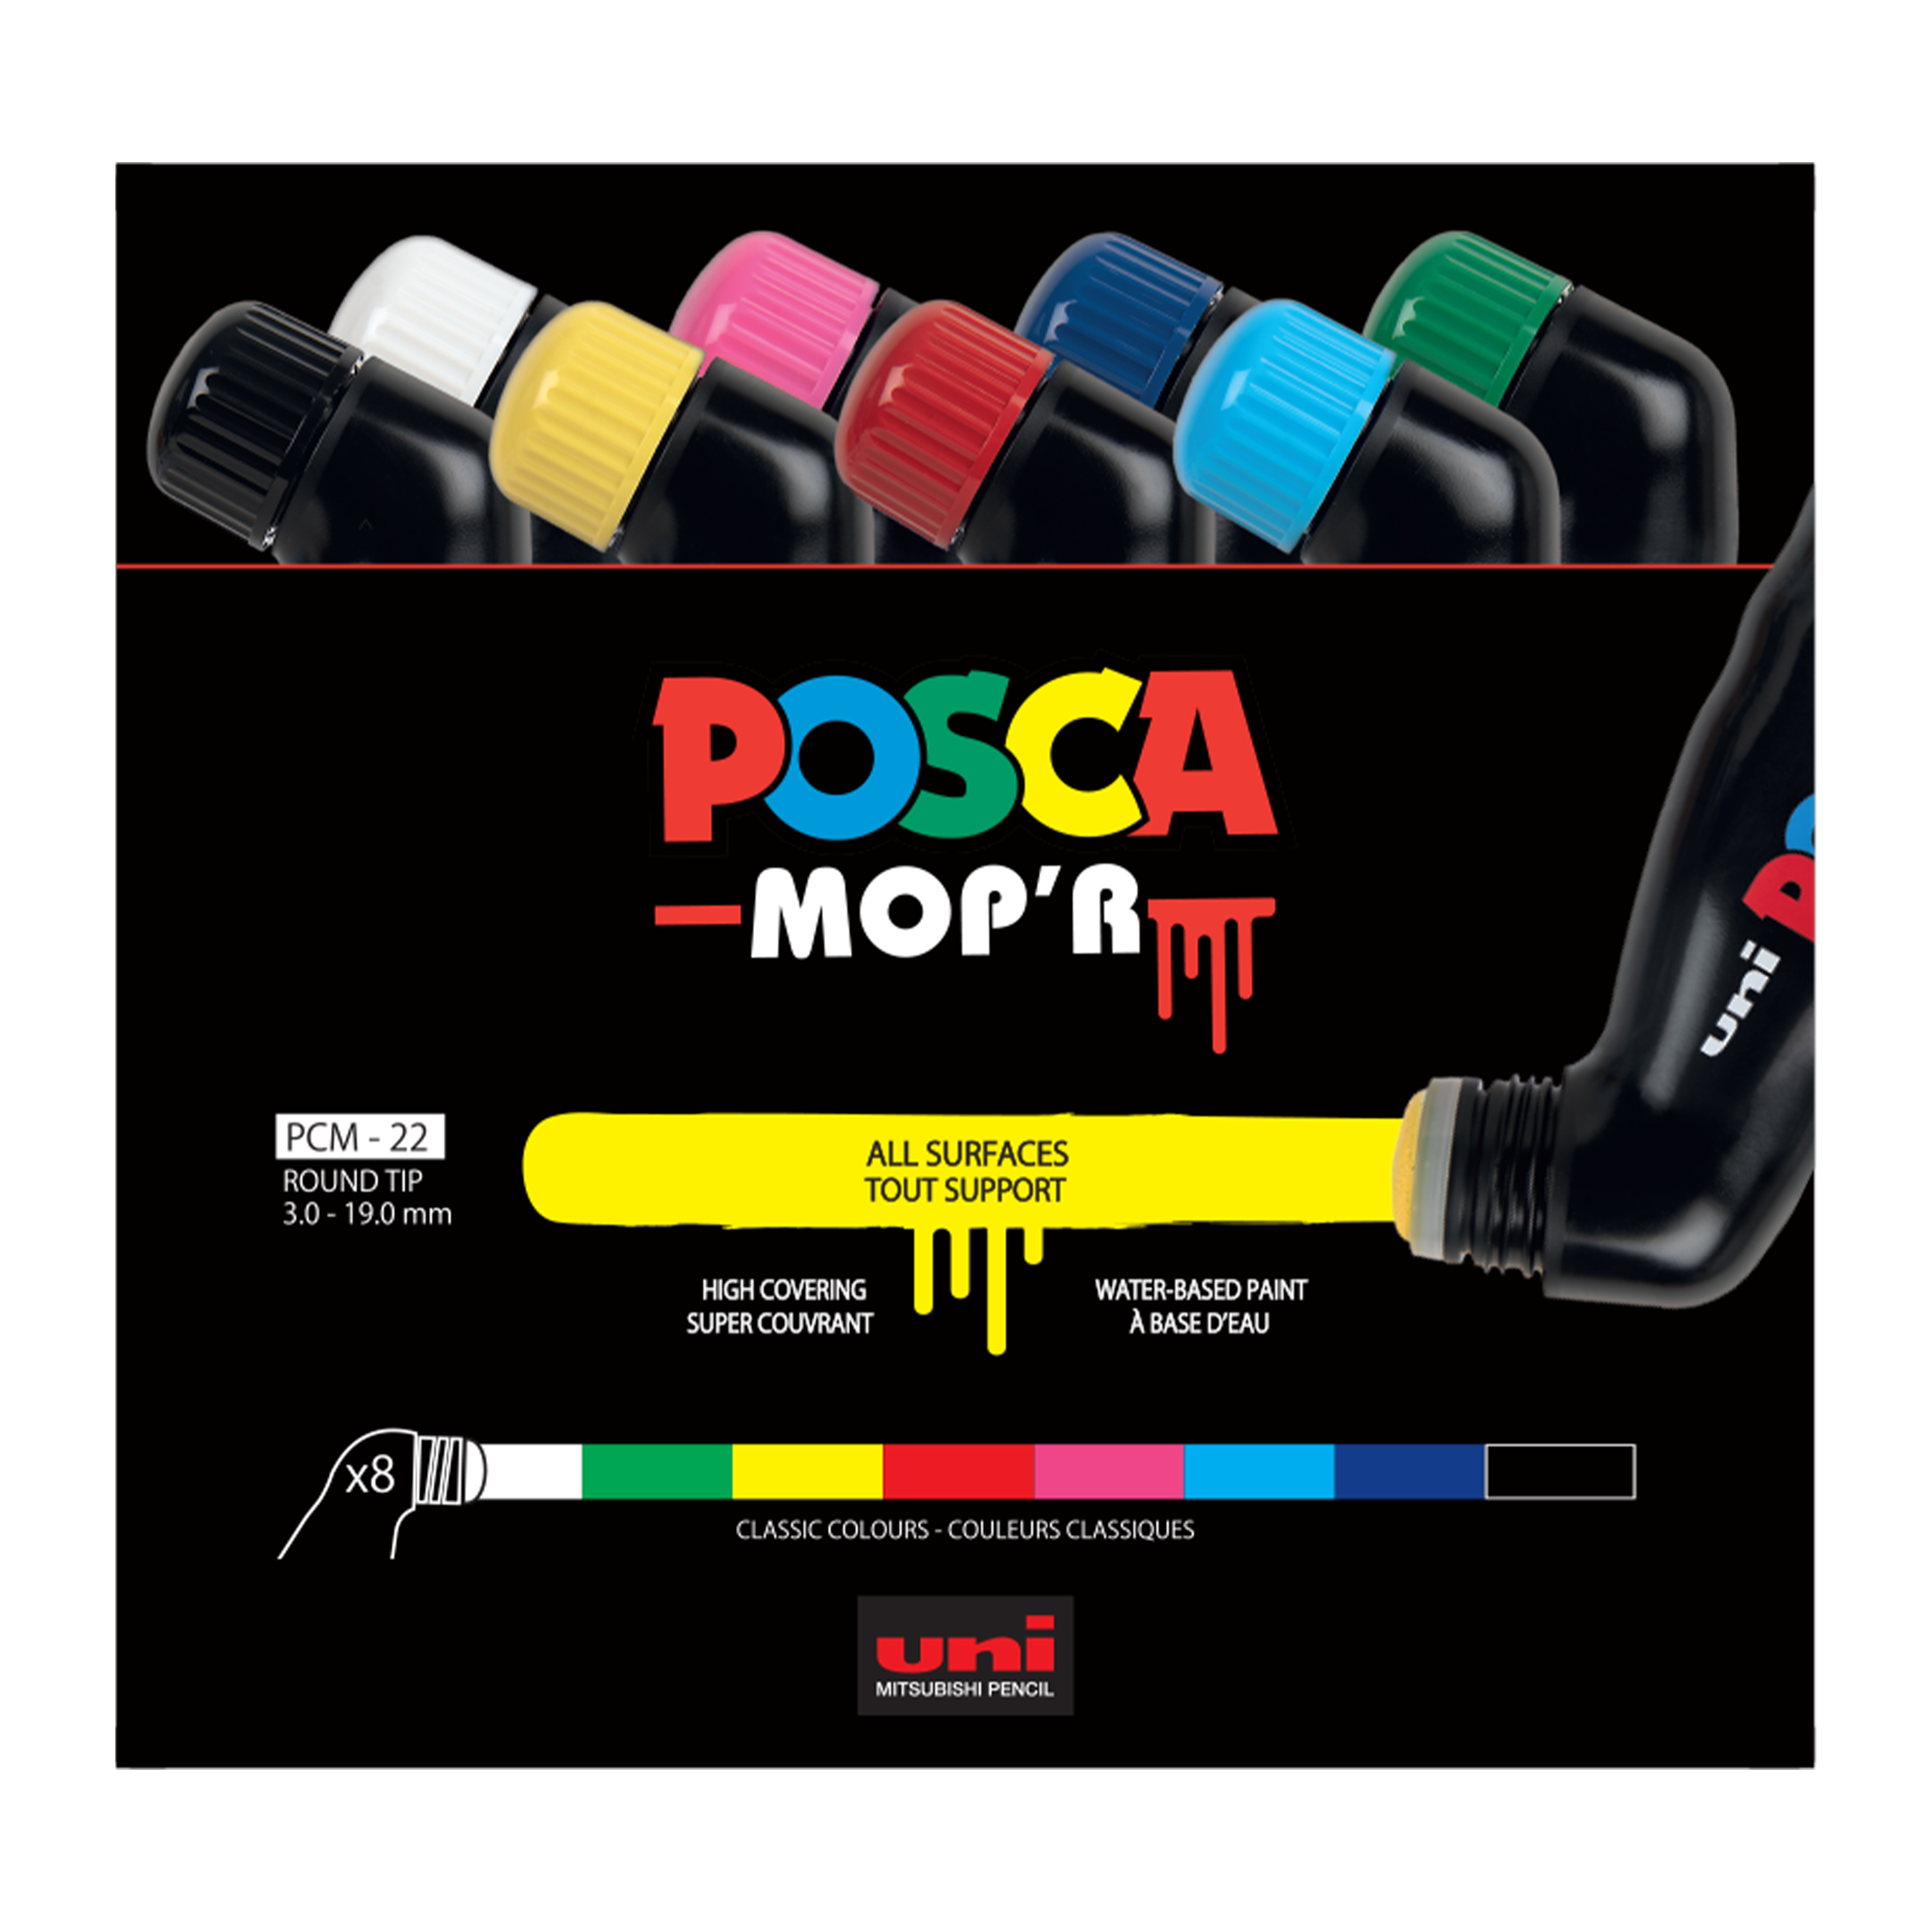 uni® POSCA® MOP'R PCM-22 Water-Based Paint Markers (8 Pack)